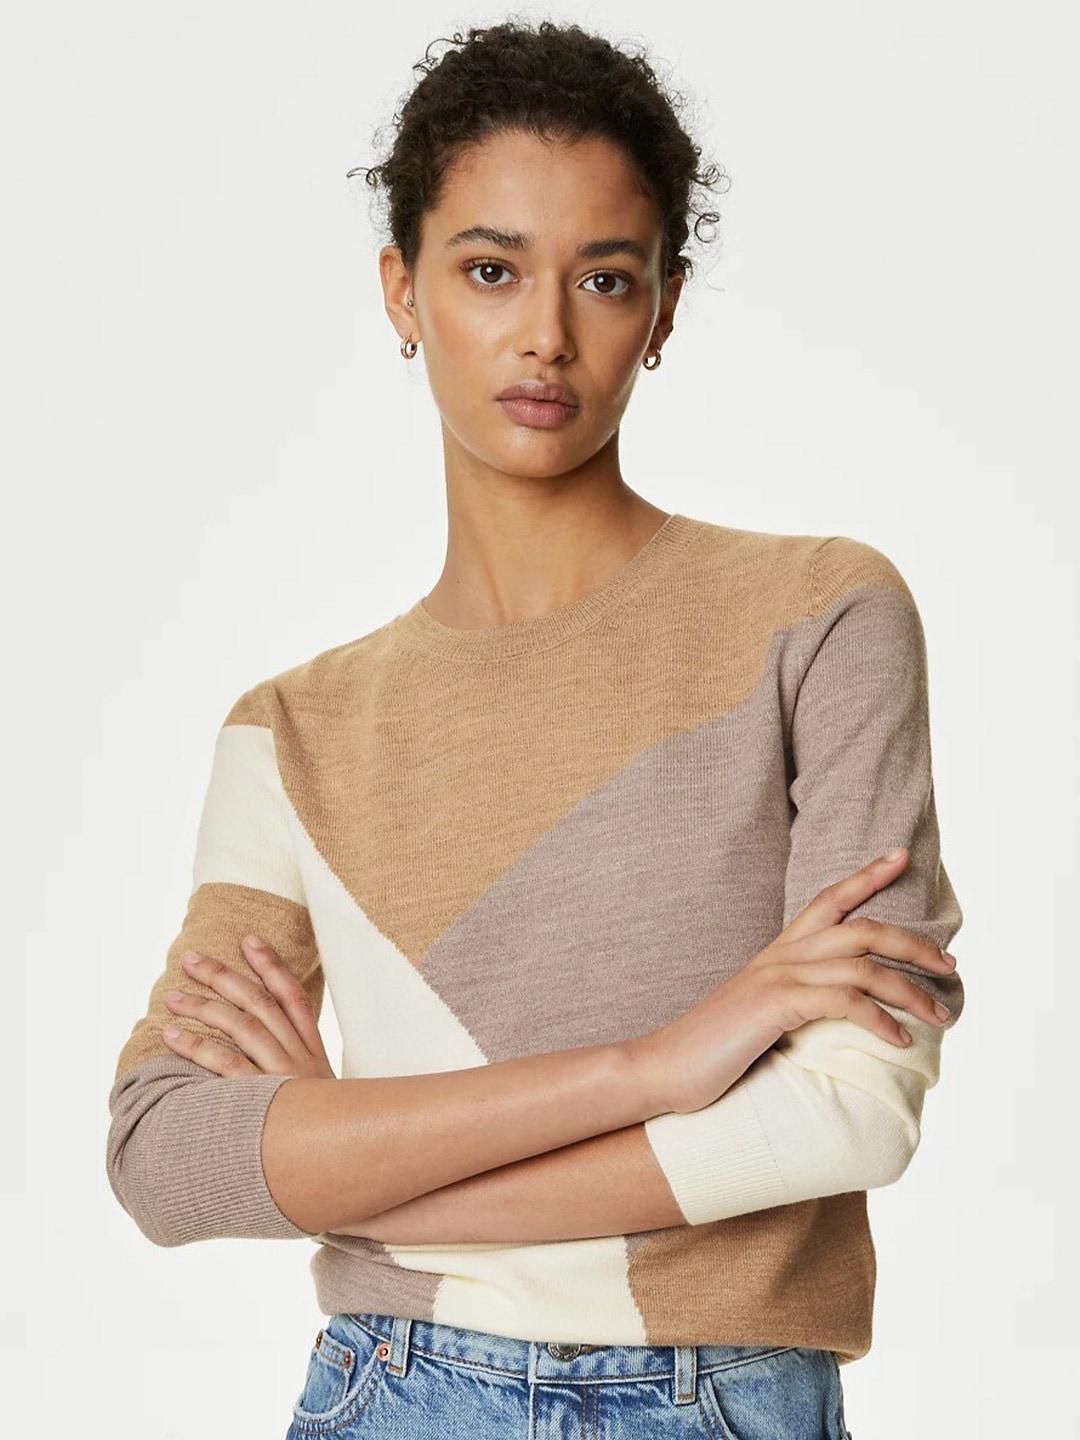 marks-&-spencer-colourblocked-round-neck-pullover-sweaters